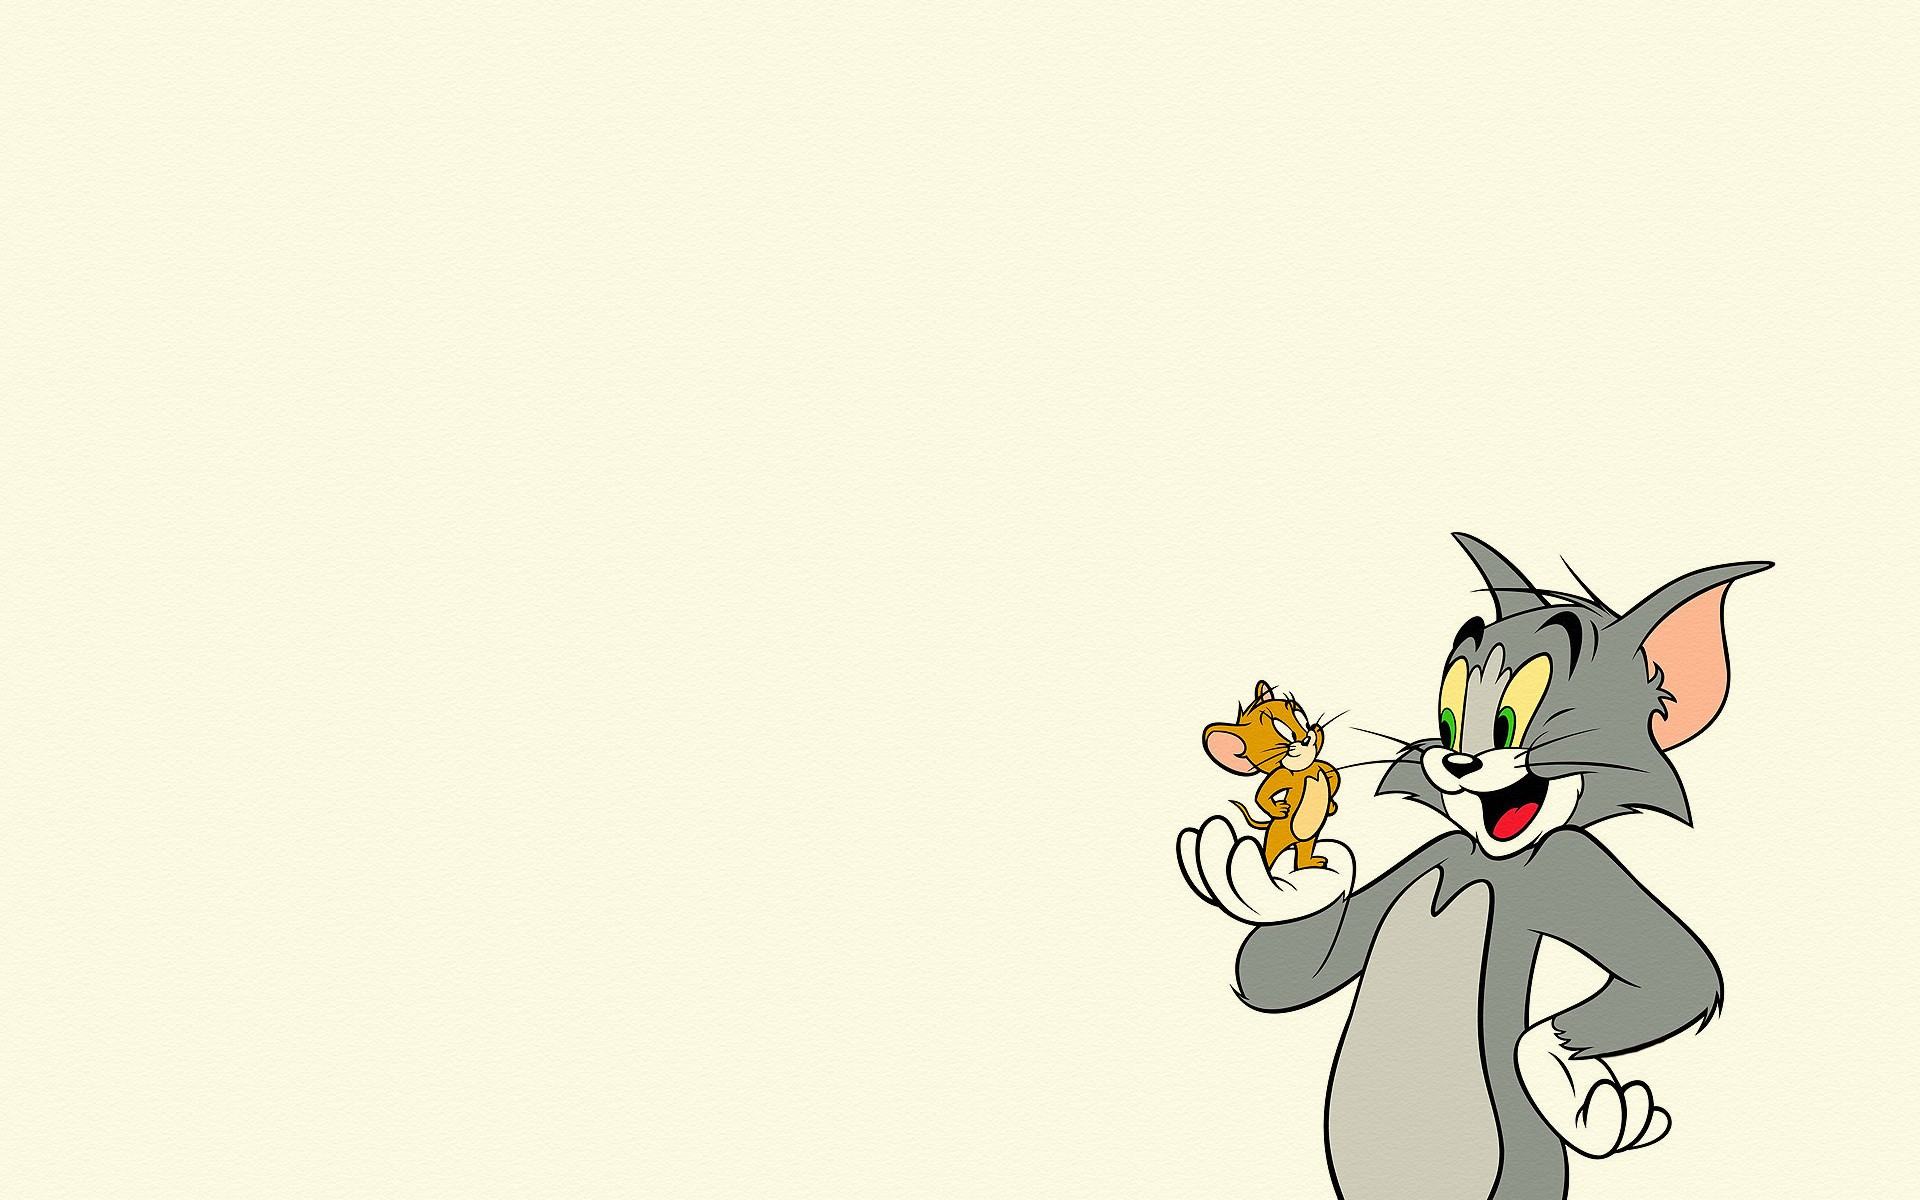 General 1920x1200 Tom and Jerry cartoon simple background white background minimalism smiling cats mice fictional character